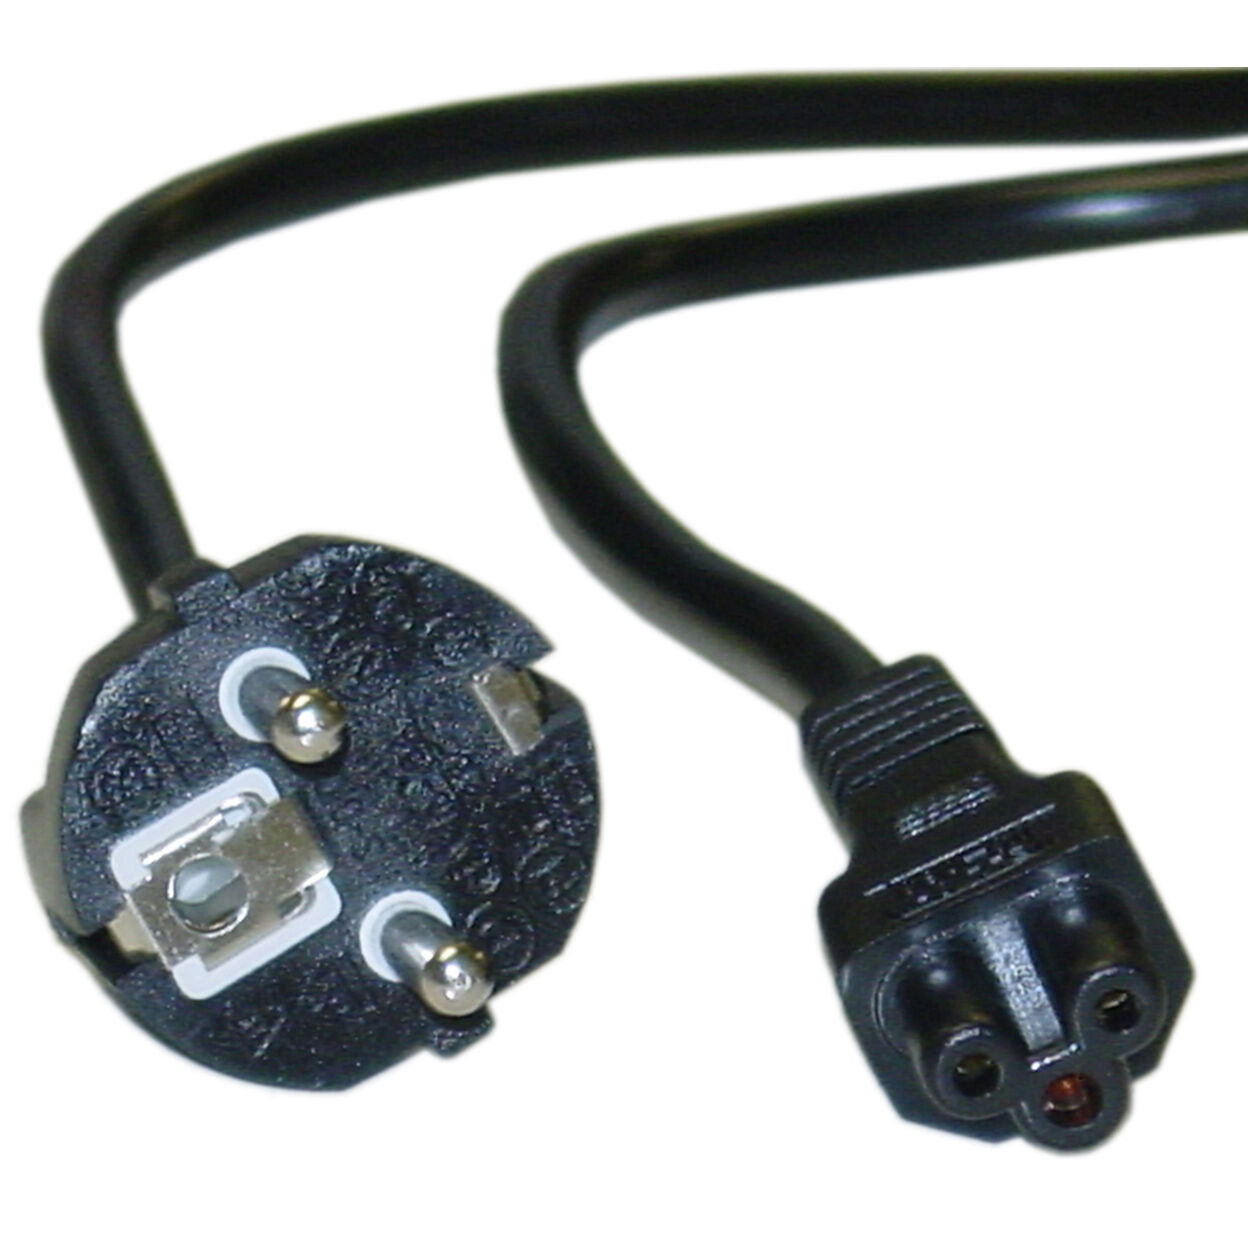 6ft European Notebook/Laptop Power Cord, Europlug or CE 7/7 to C5 10W1-15306